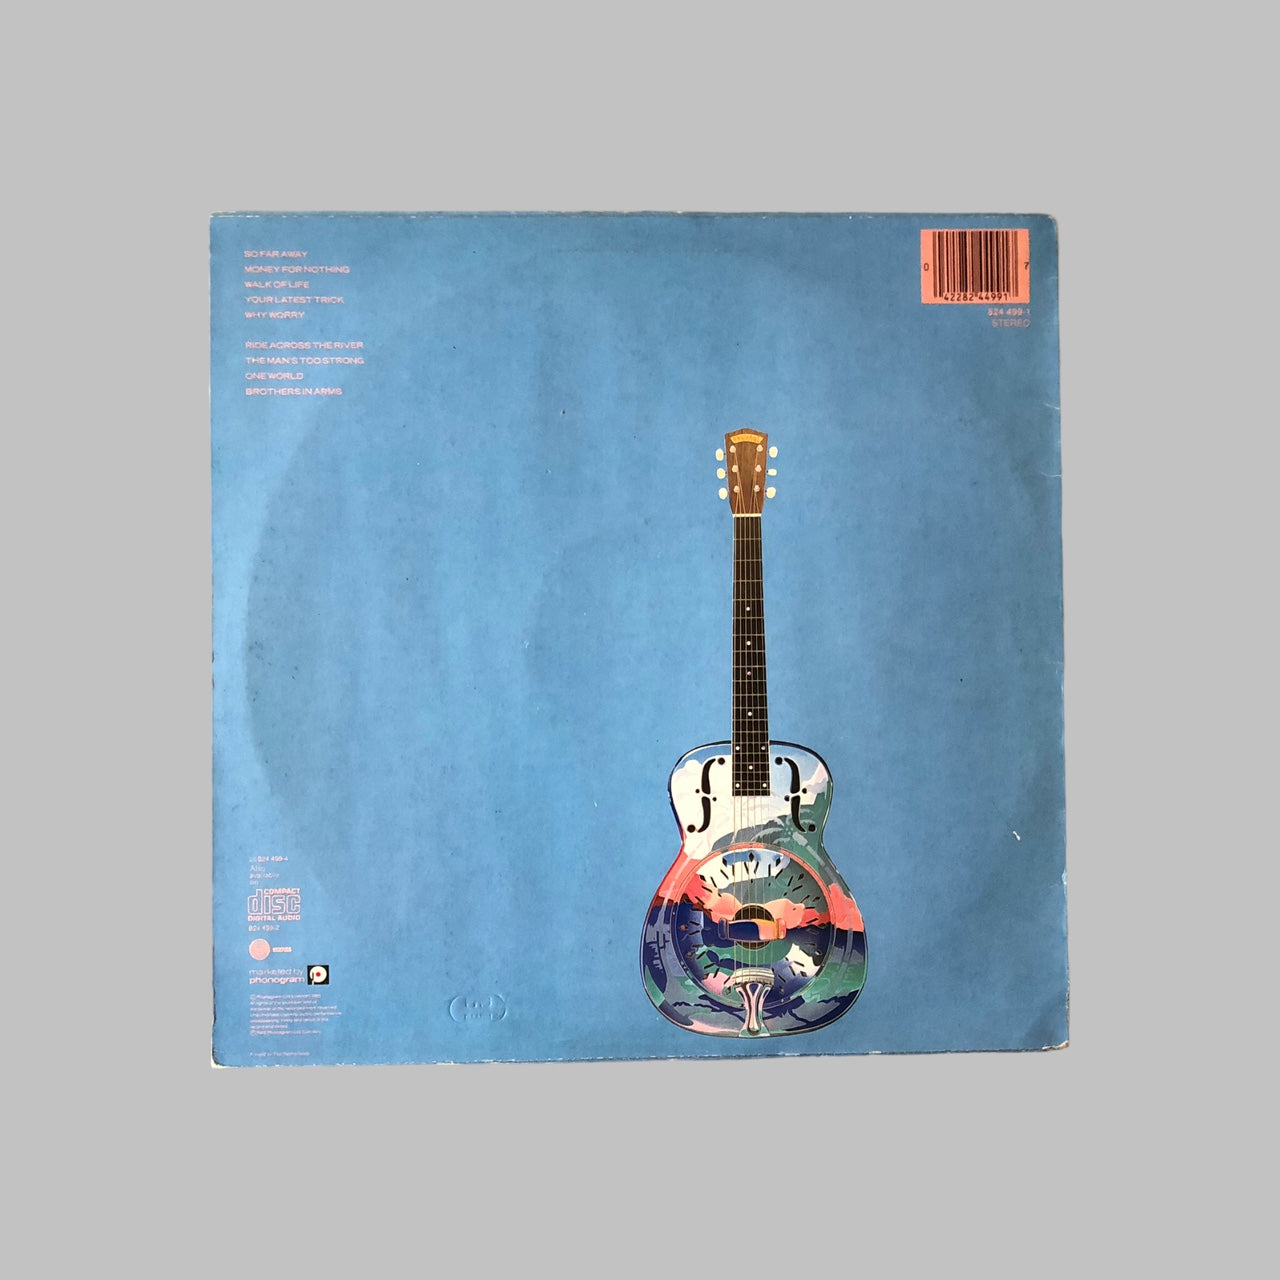 LP Vinyl - Dire Straits - Brothers in Arms.